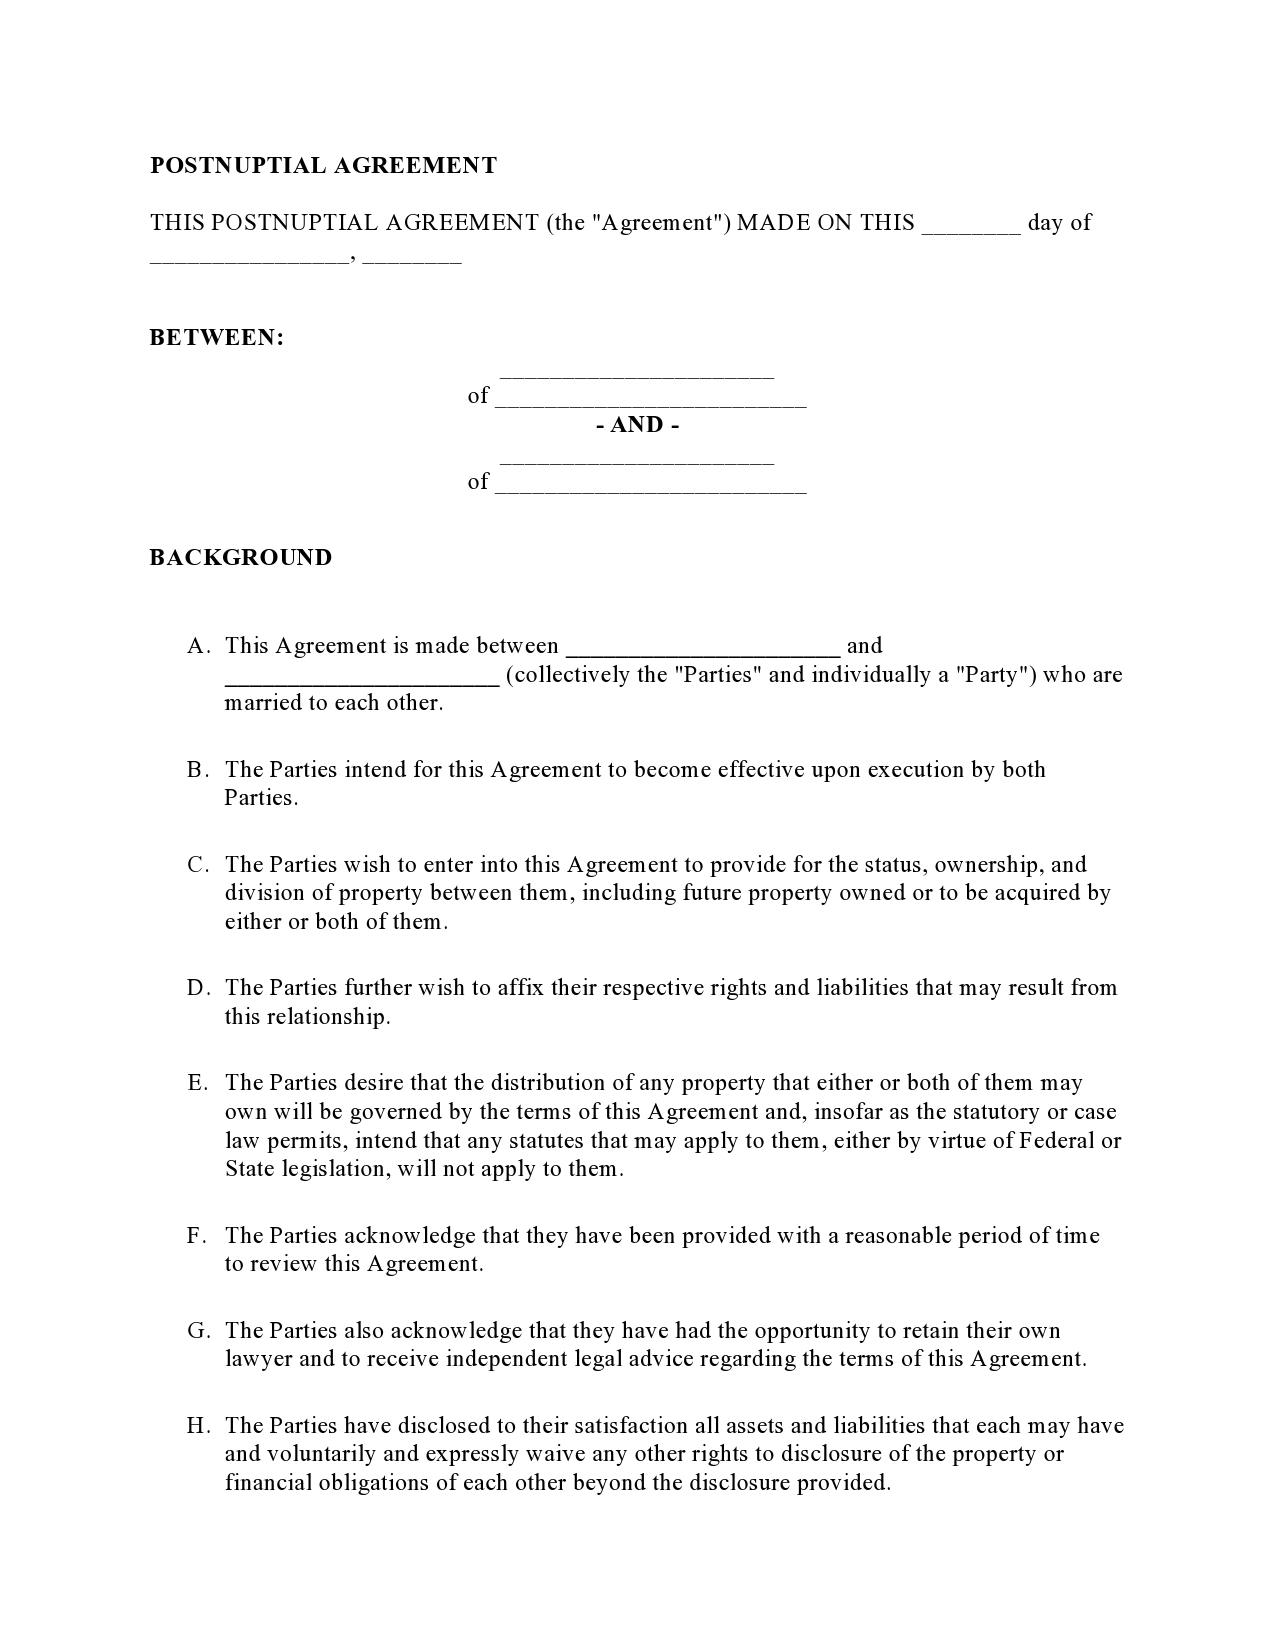 Free postnuptial agreement template 12